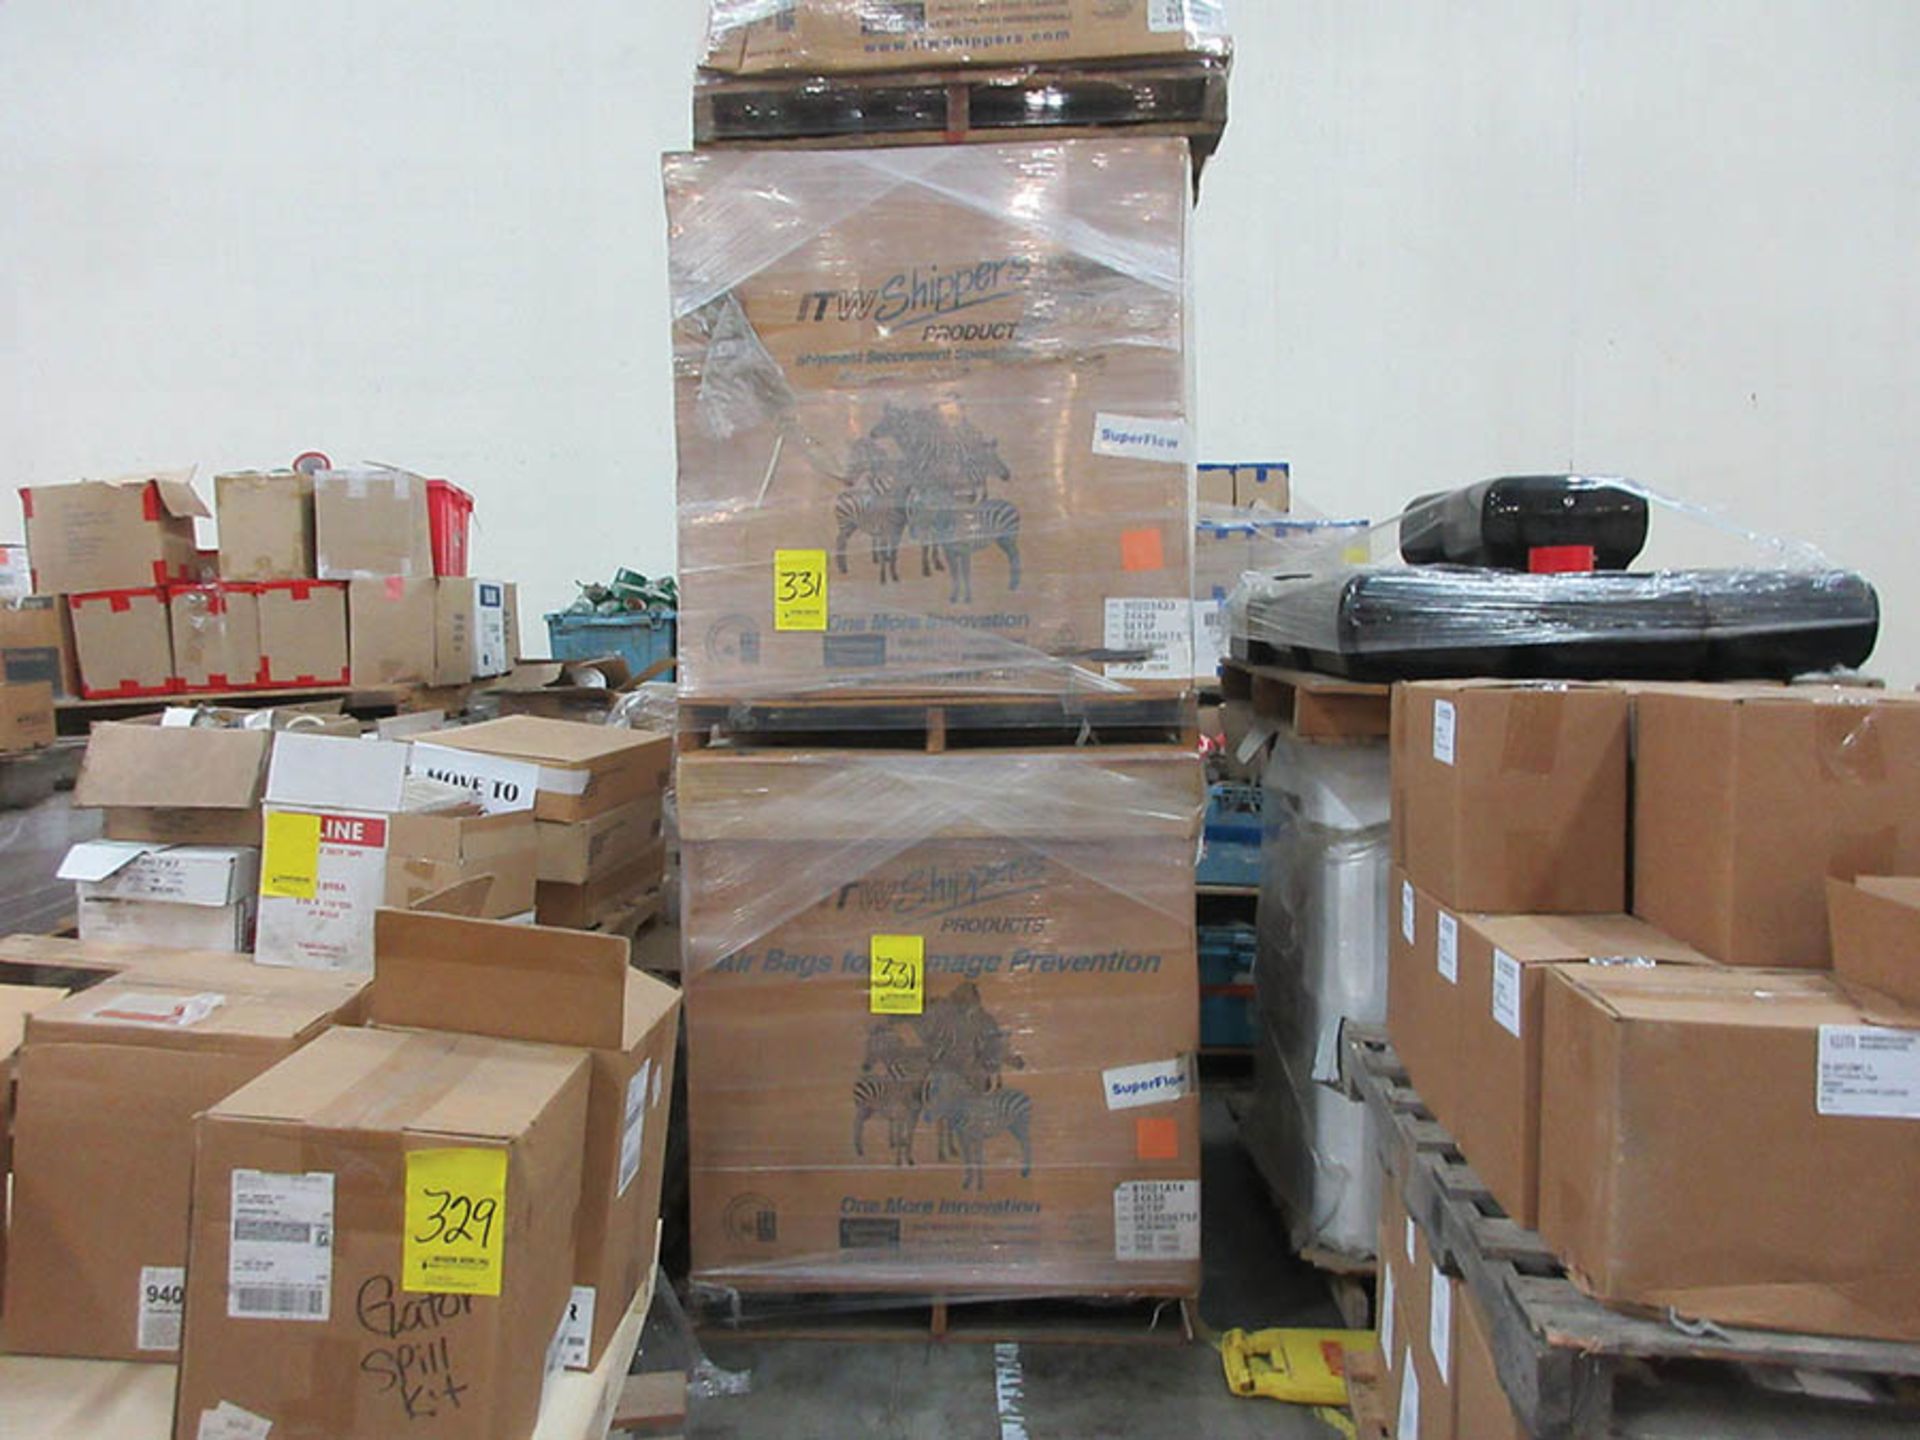 (2) BOXES OF ITW SHIPPERS PRODUCTS AIR BAGS